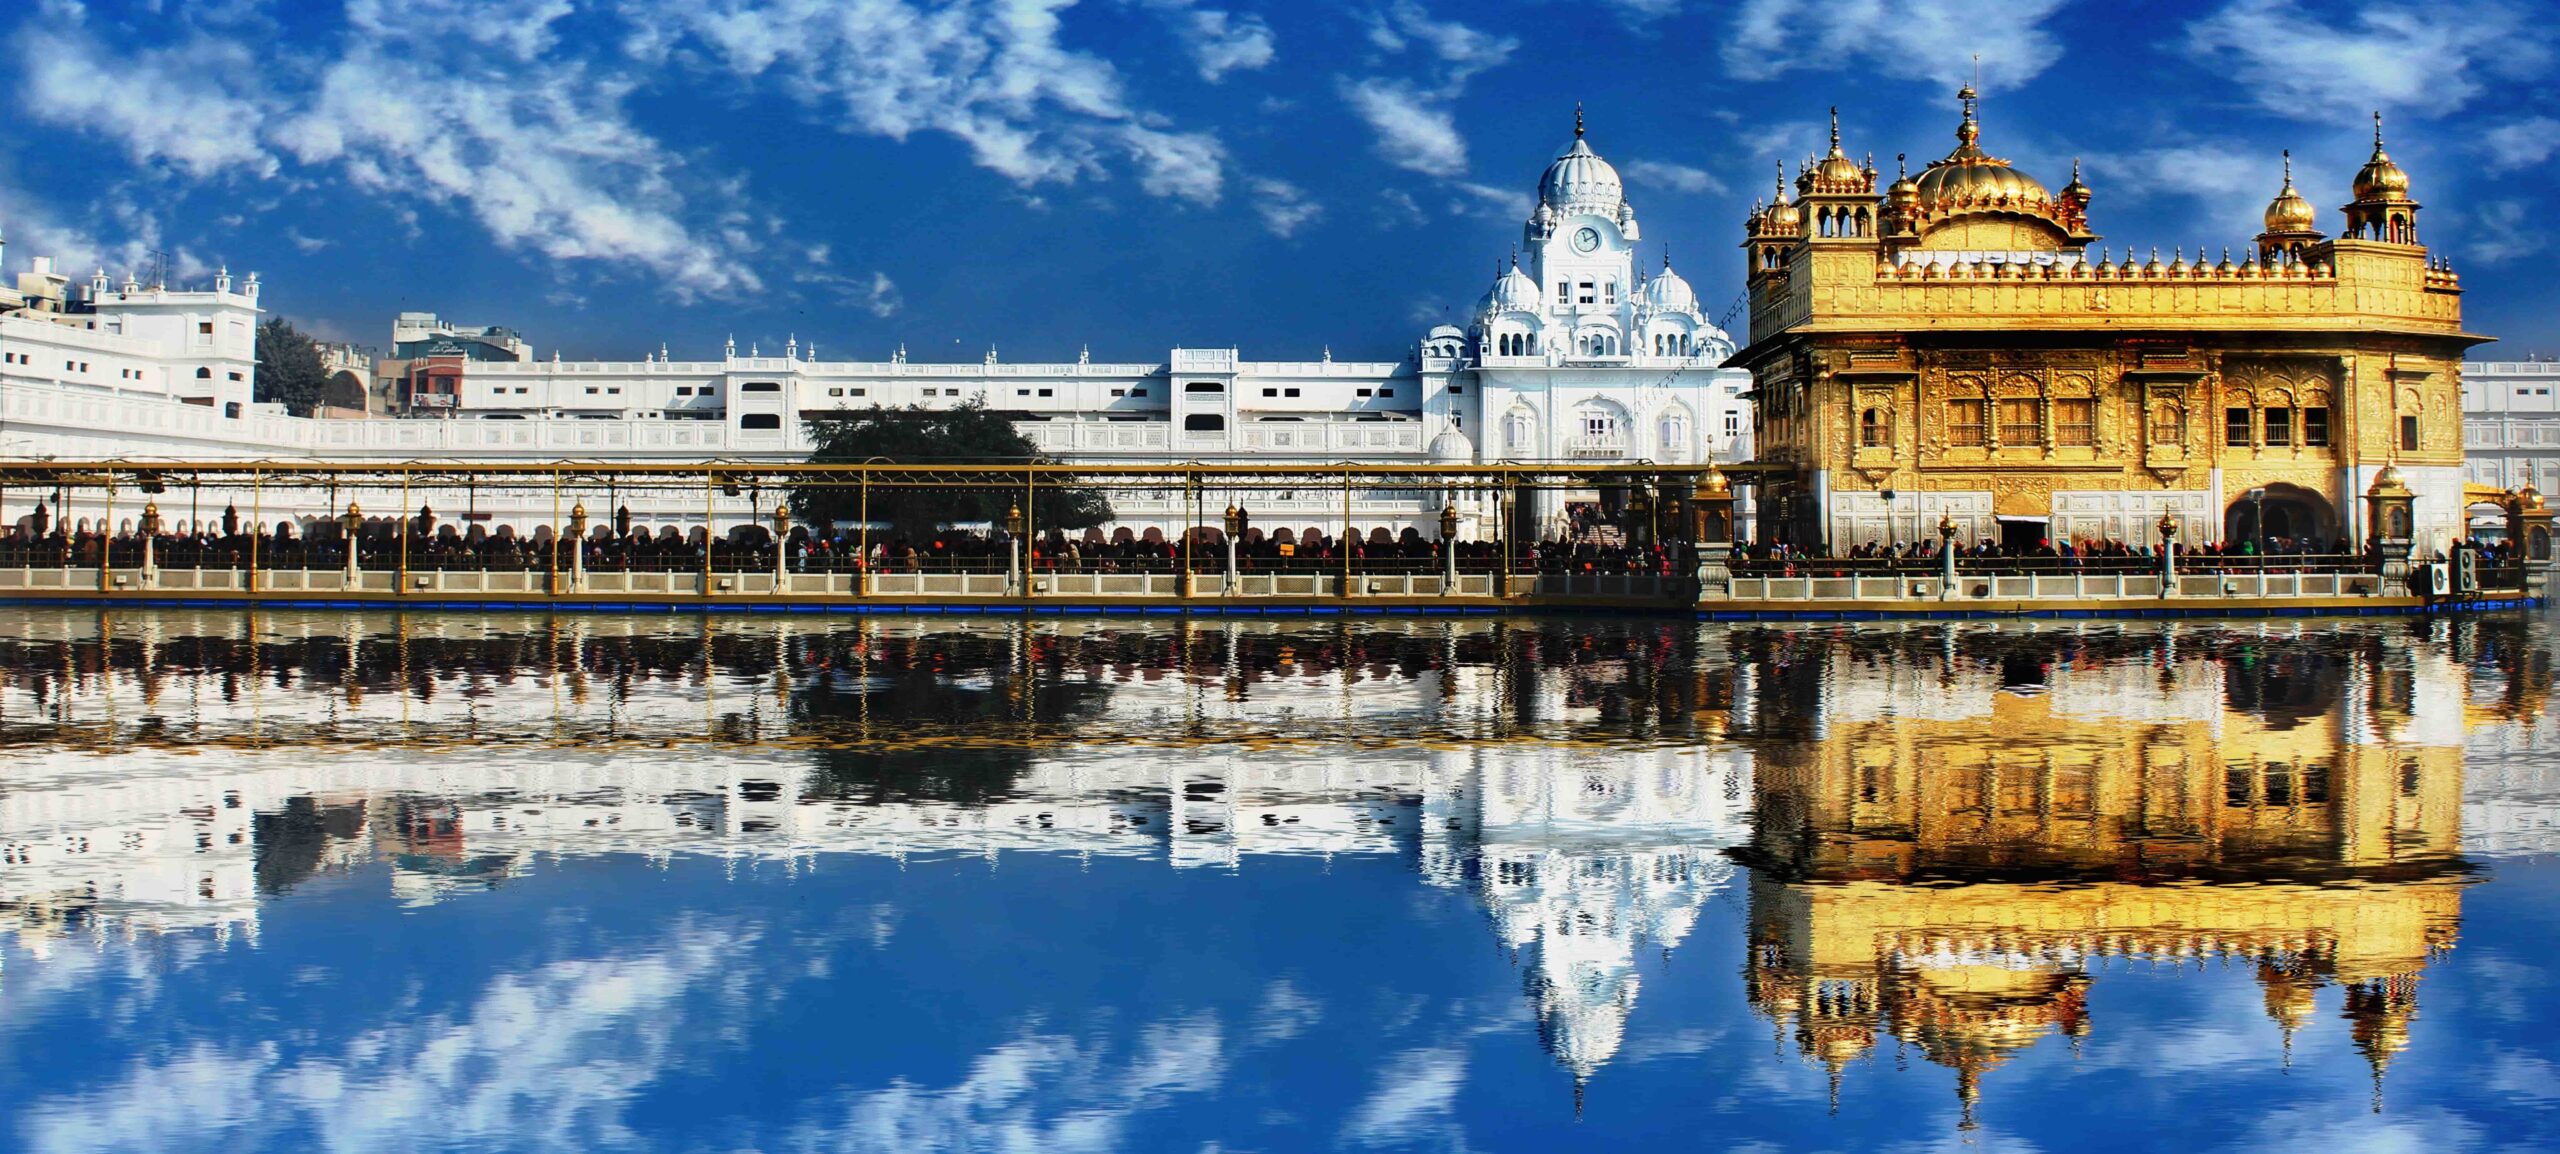 Taxi Service In Amritsar, Taxi Hire in Amritsar